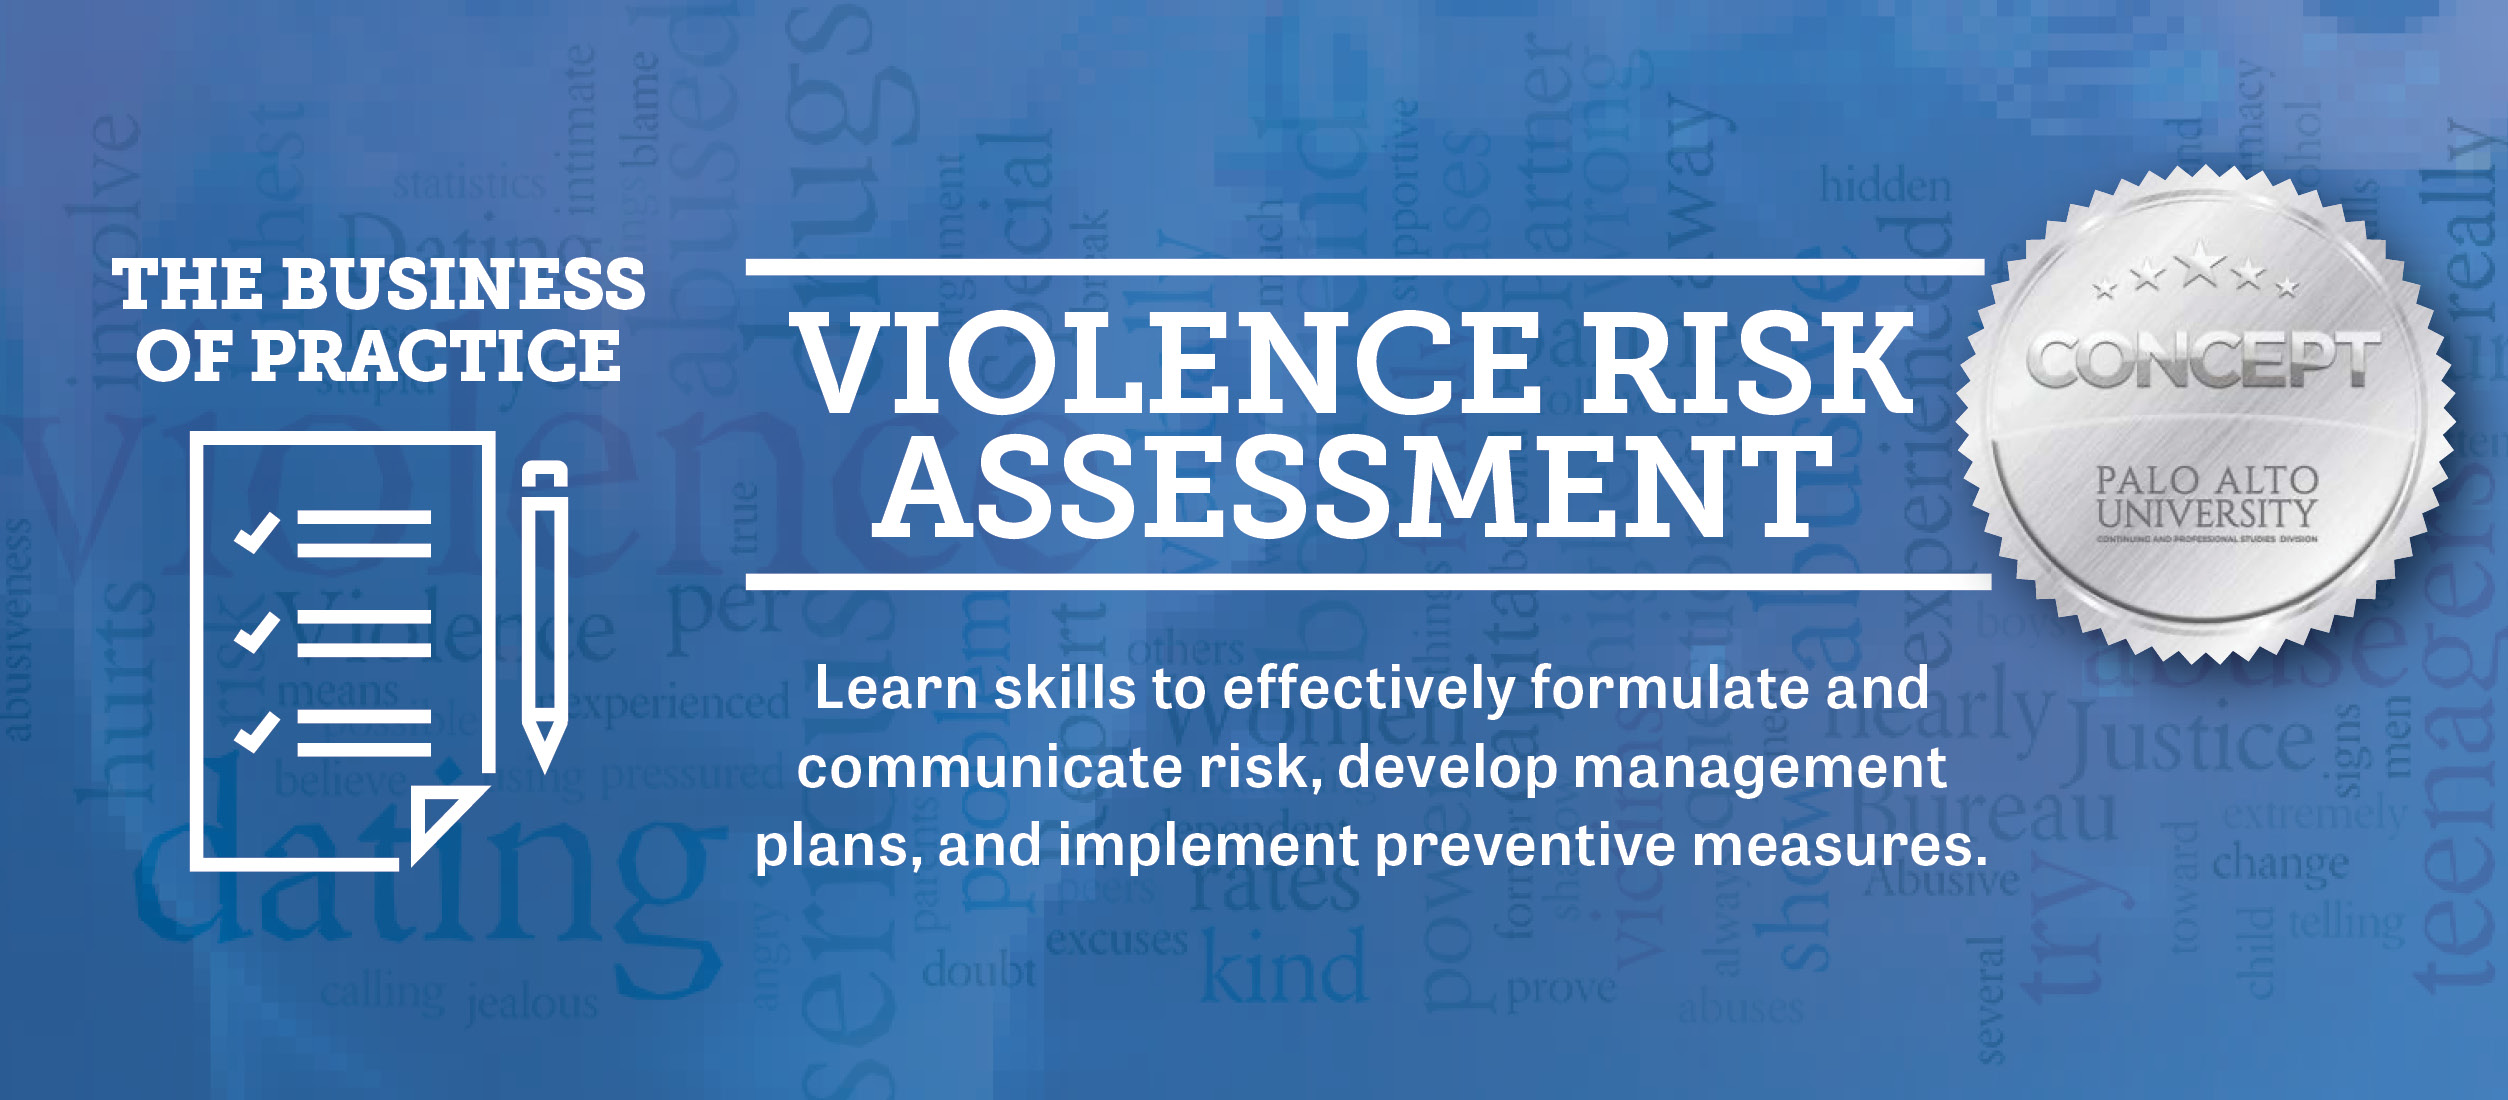 Overview of the Violence Risk Assessment Certificate